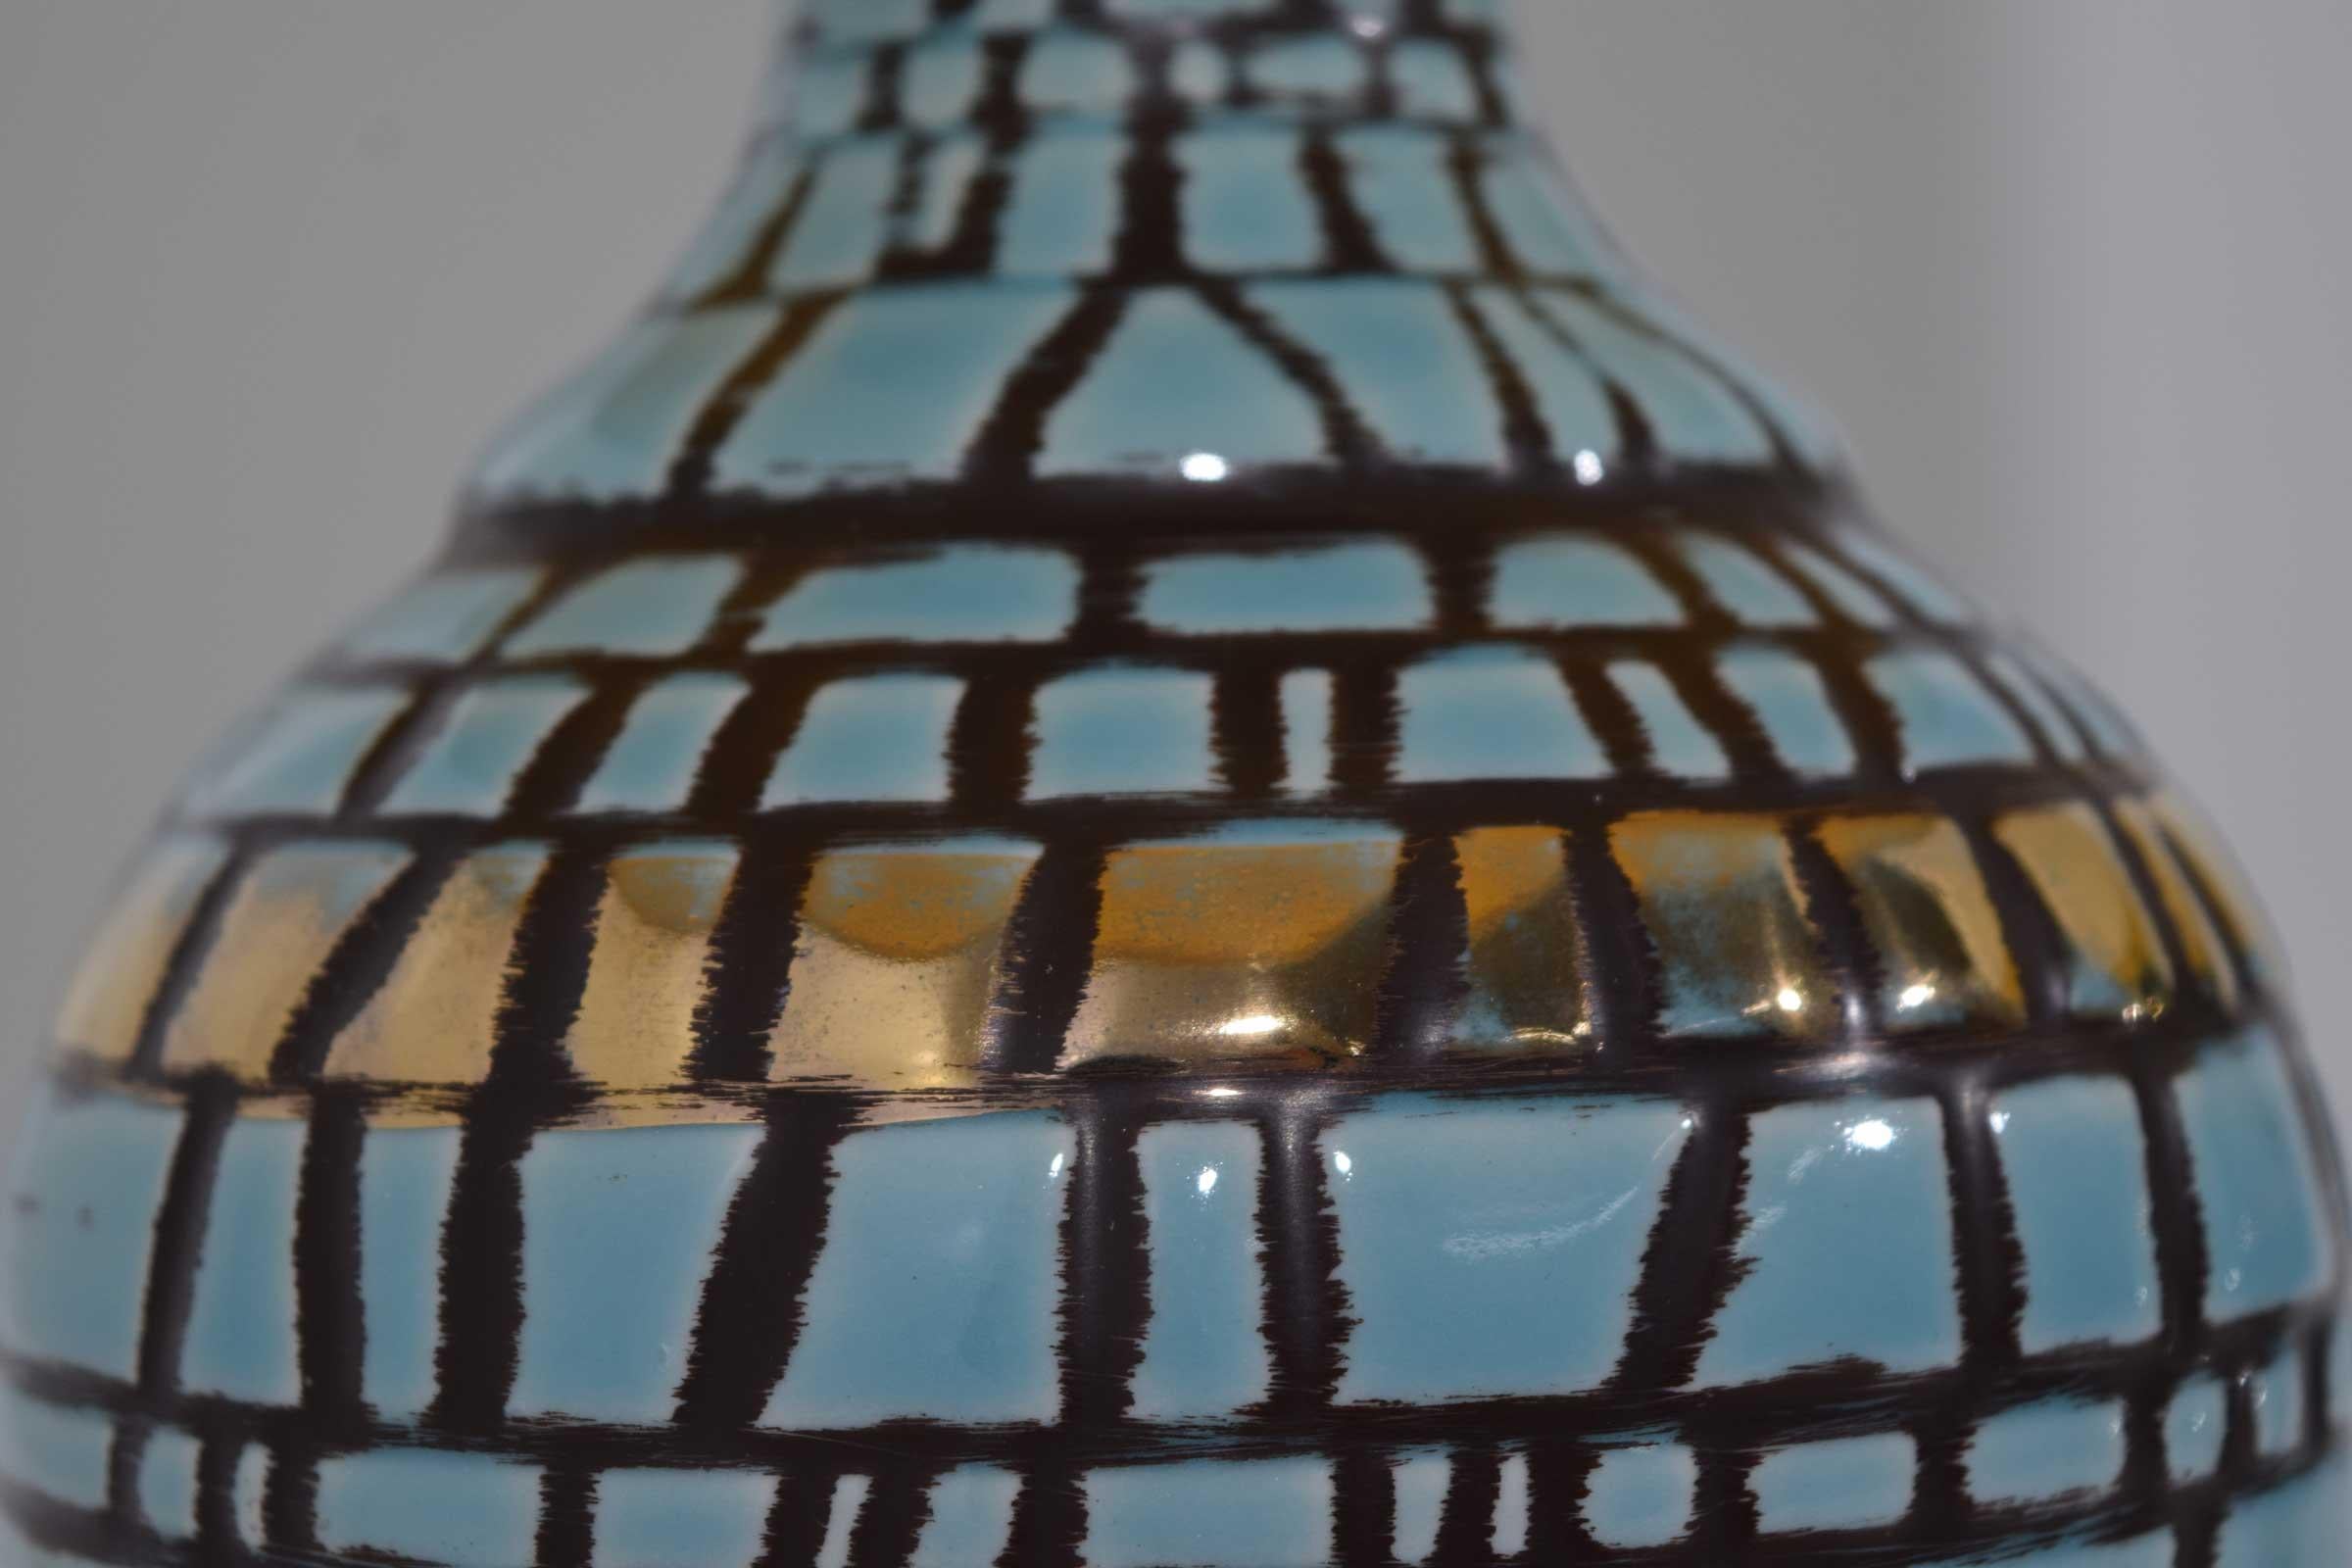 Mid-Century Modern Midcentury Ceramic Tiled Lamps in Turquoise and Gold